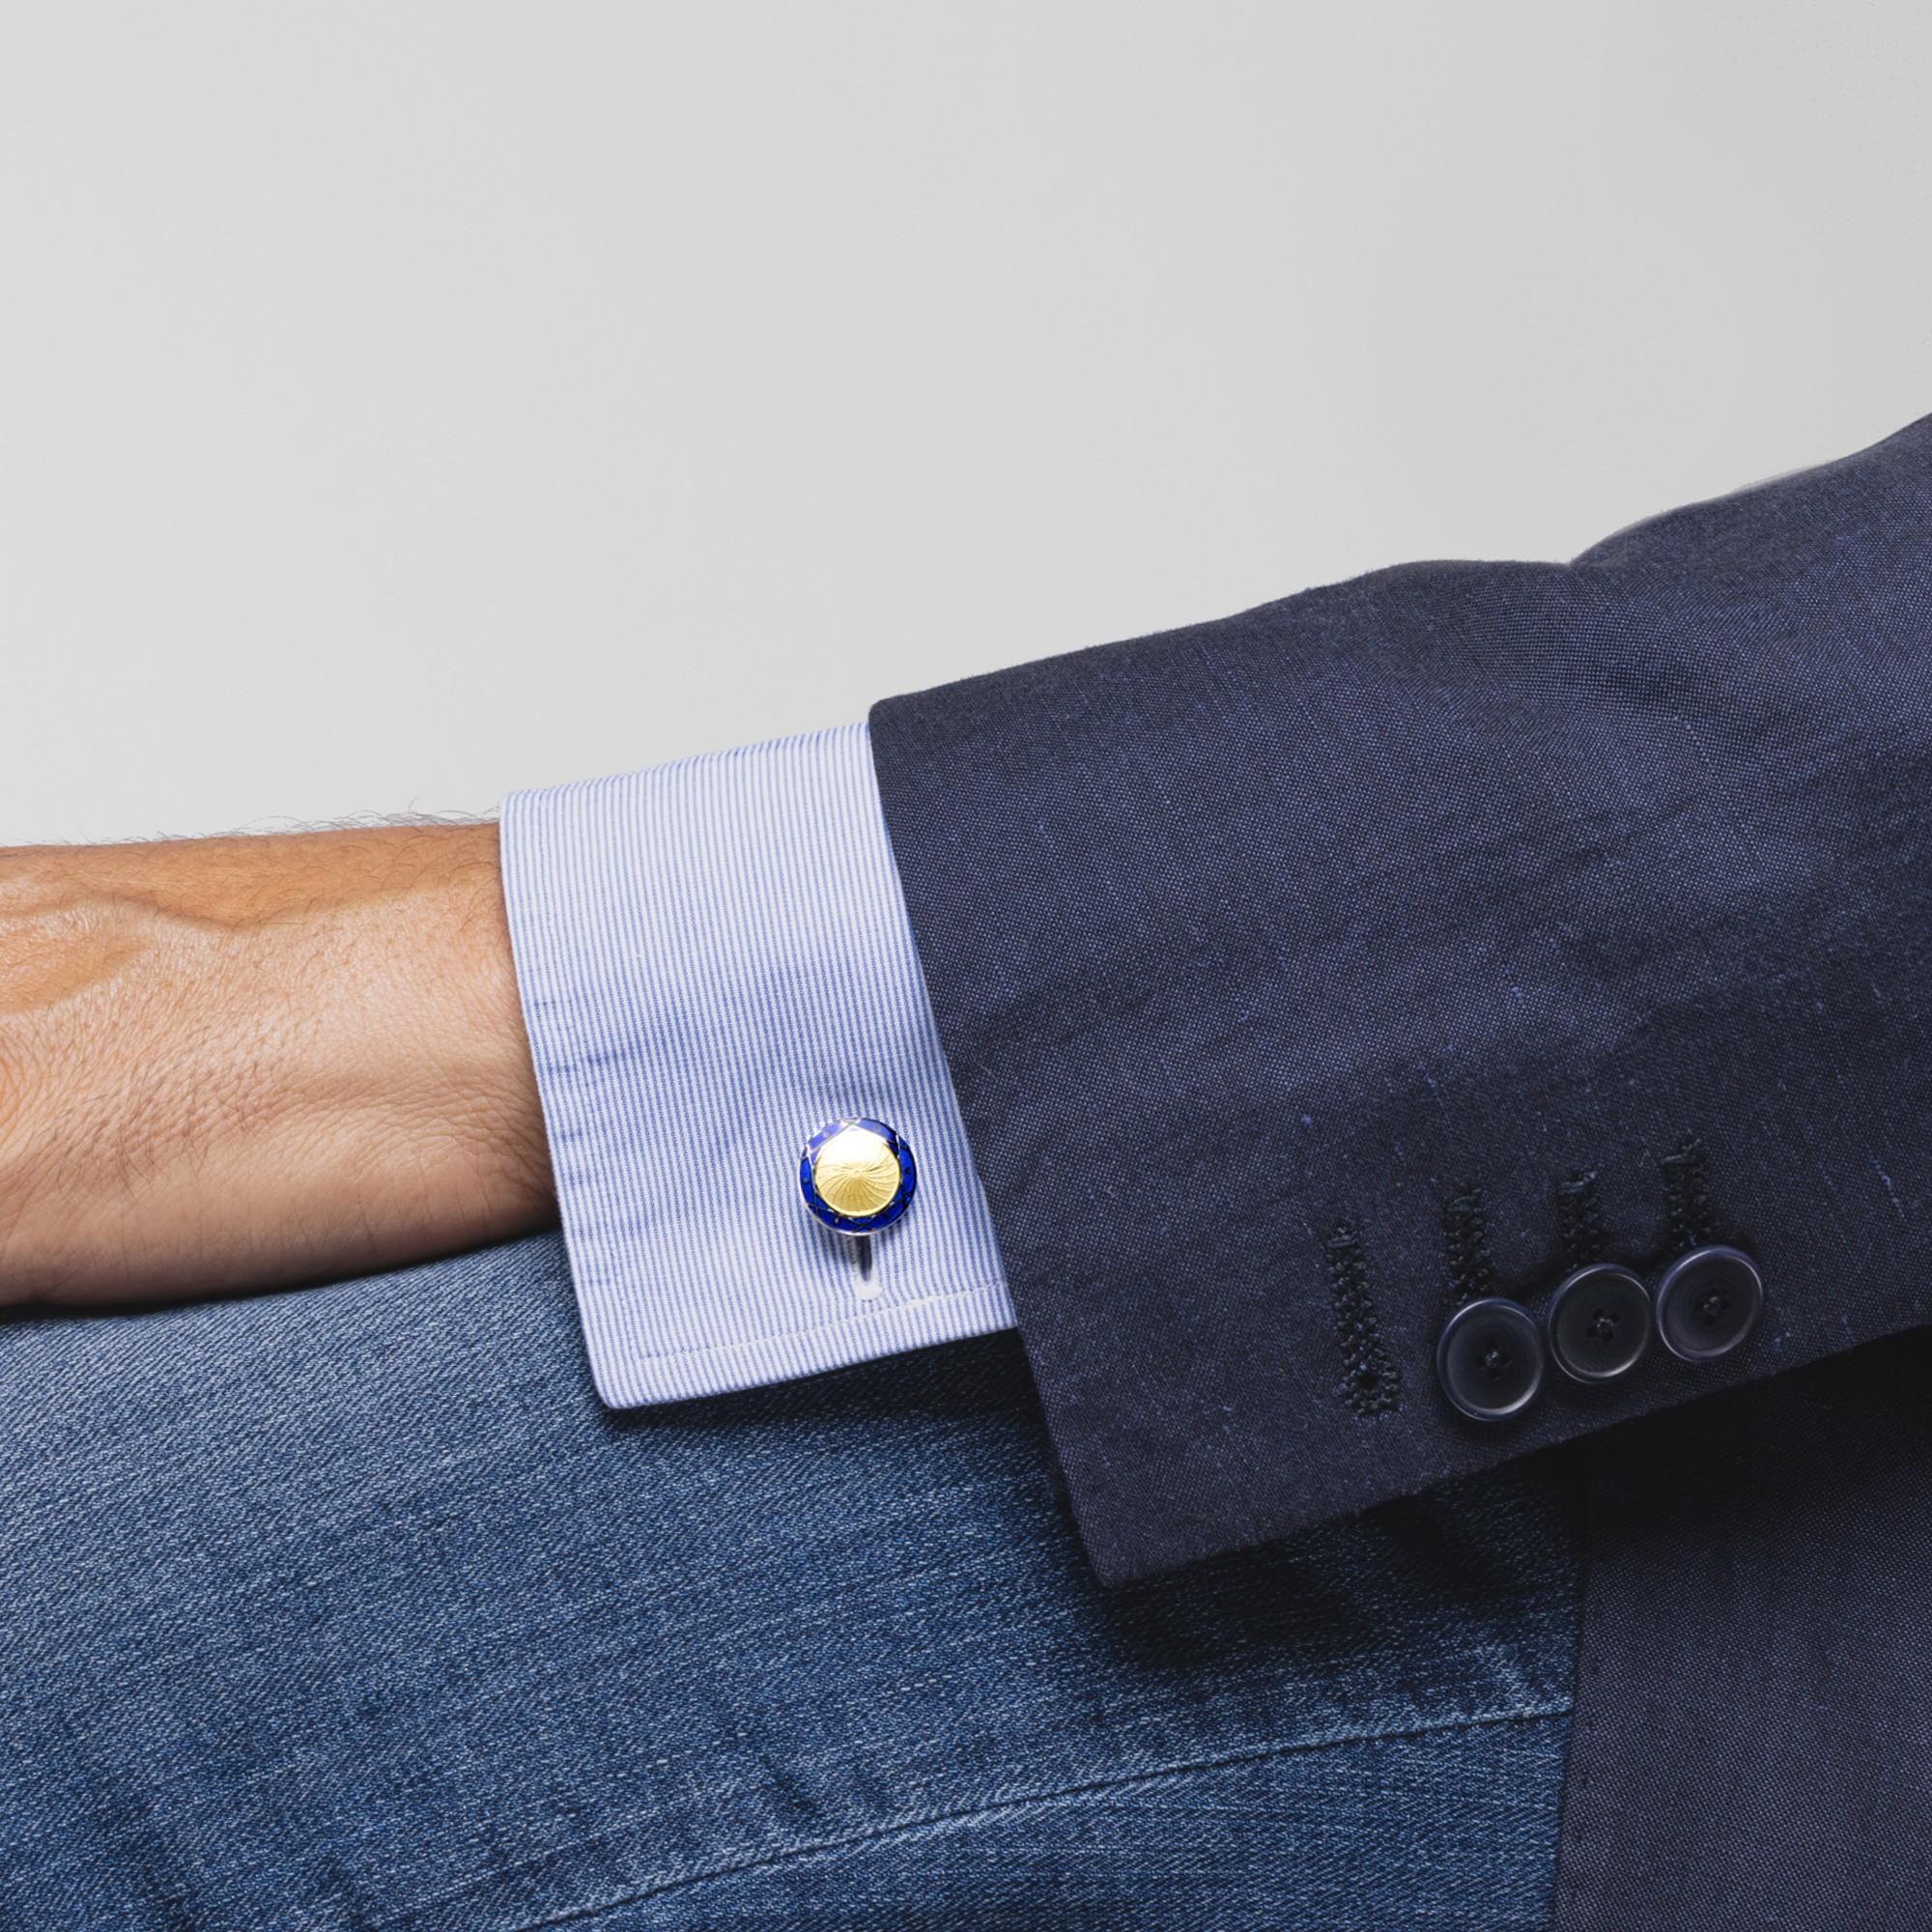 Alex Jona design collection, hand crafted in Italy, rhodium plated Sterling Silver cufflinks with blue and yellow enamel. These cufflinks feature a T-Bar fastening, aiding in easy use and confidence that they'll stay secured to your shirt.